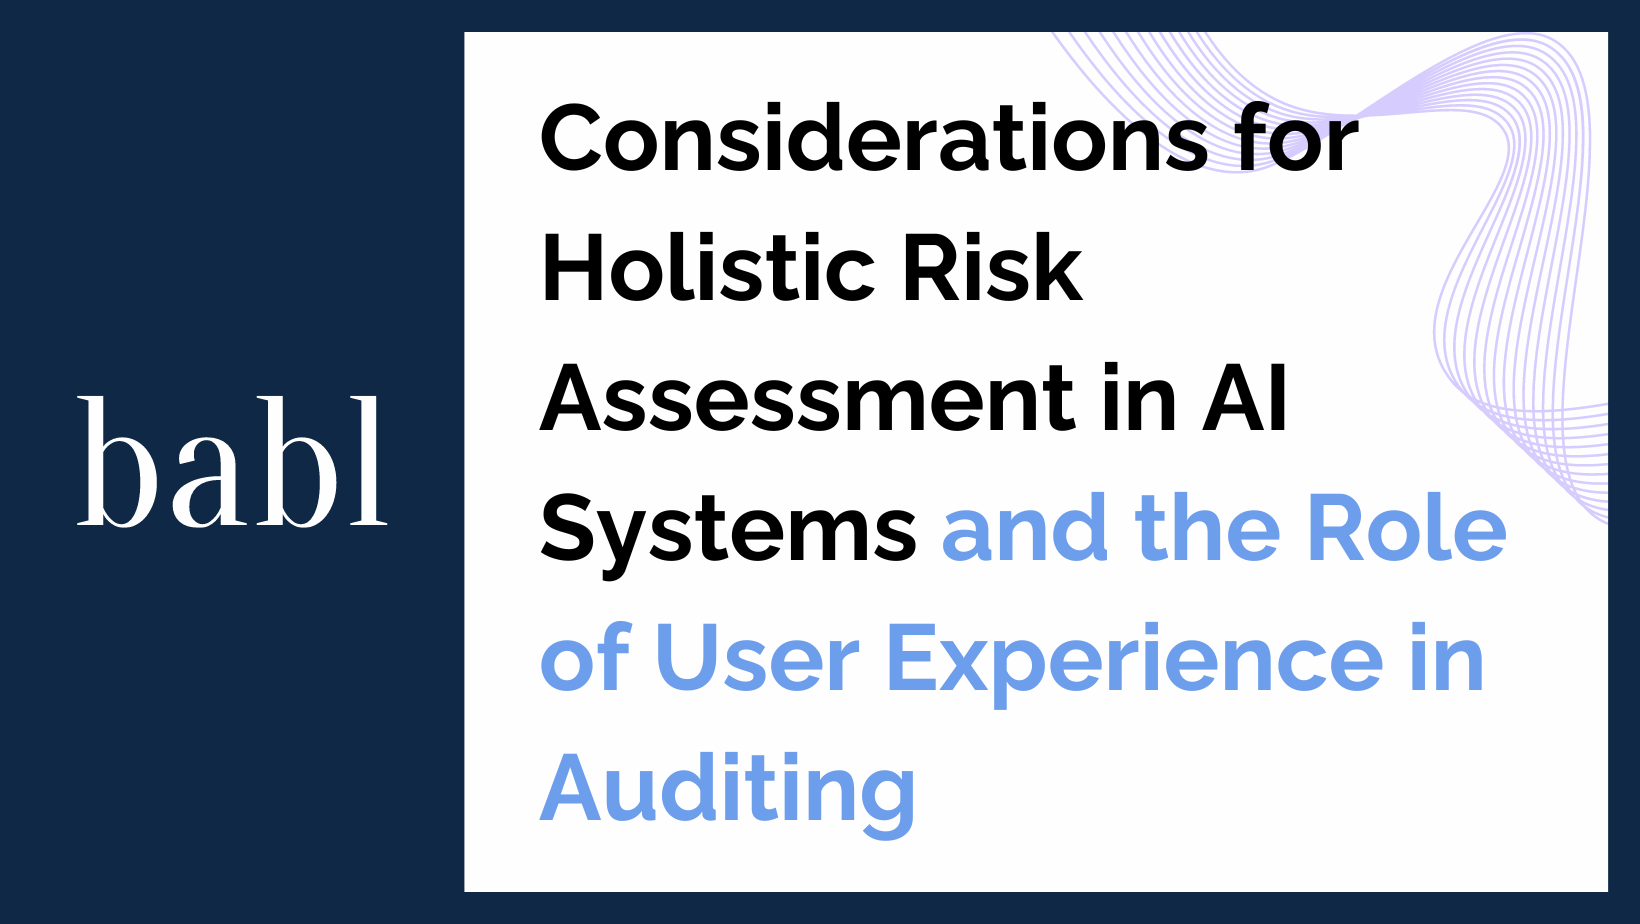 Considerations for Holistic Risk Assessment in AI Systems and the Role of User Experience in Auditing